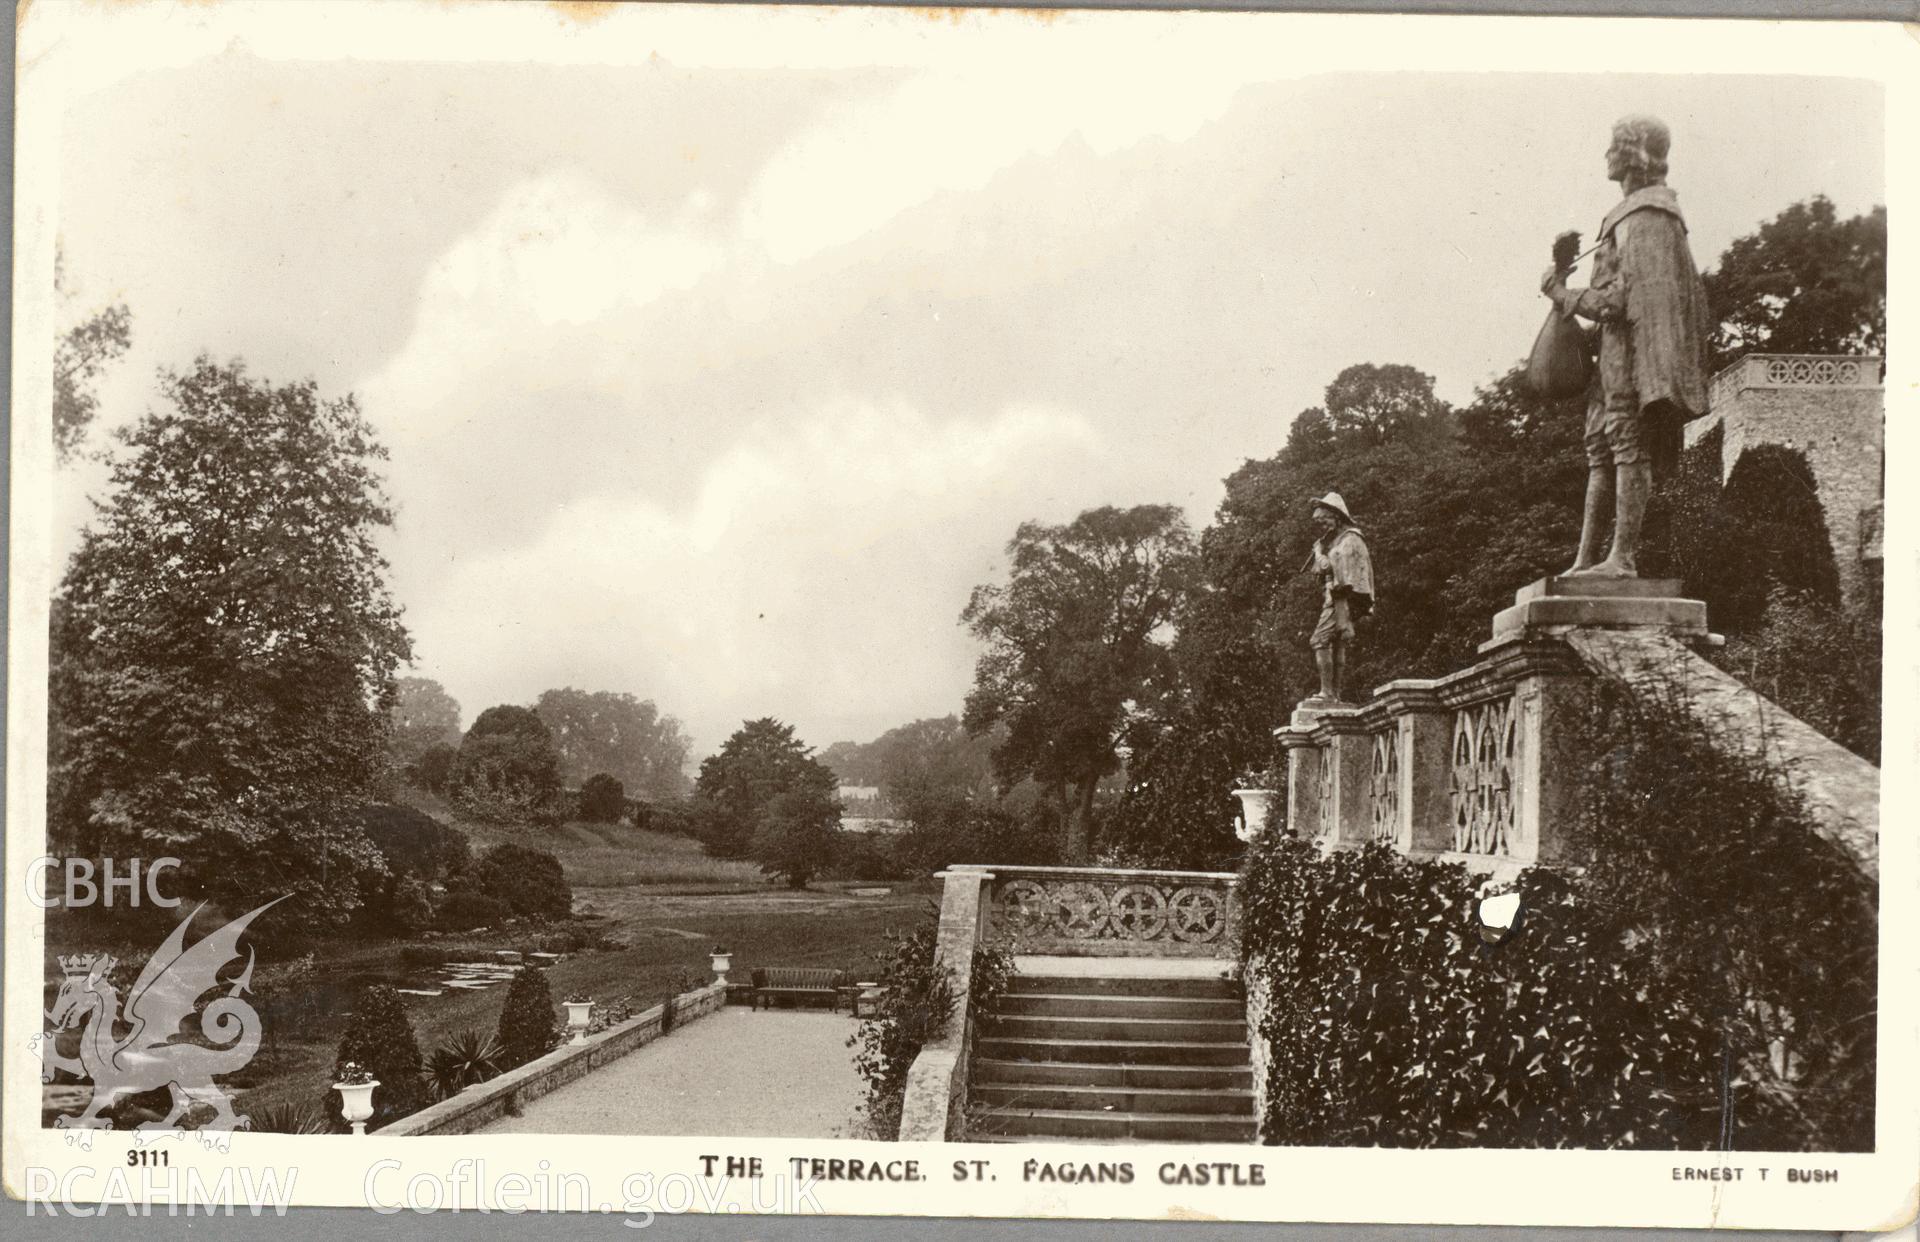 Digitised postcard image of the terrace, St Fagans castle with statues, The Royal Photographic Company, London. Ernest T Bush. Produced by Parks and Gardens Data Services, from an original item in the Peter Davis Collection at Parks and Gardens UK. We hold only web-resolution images of this collection, suitable for viewing on screen and for research purposes only. We do not hold the original images, or publication quality scans.